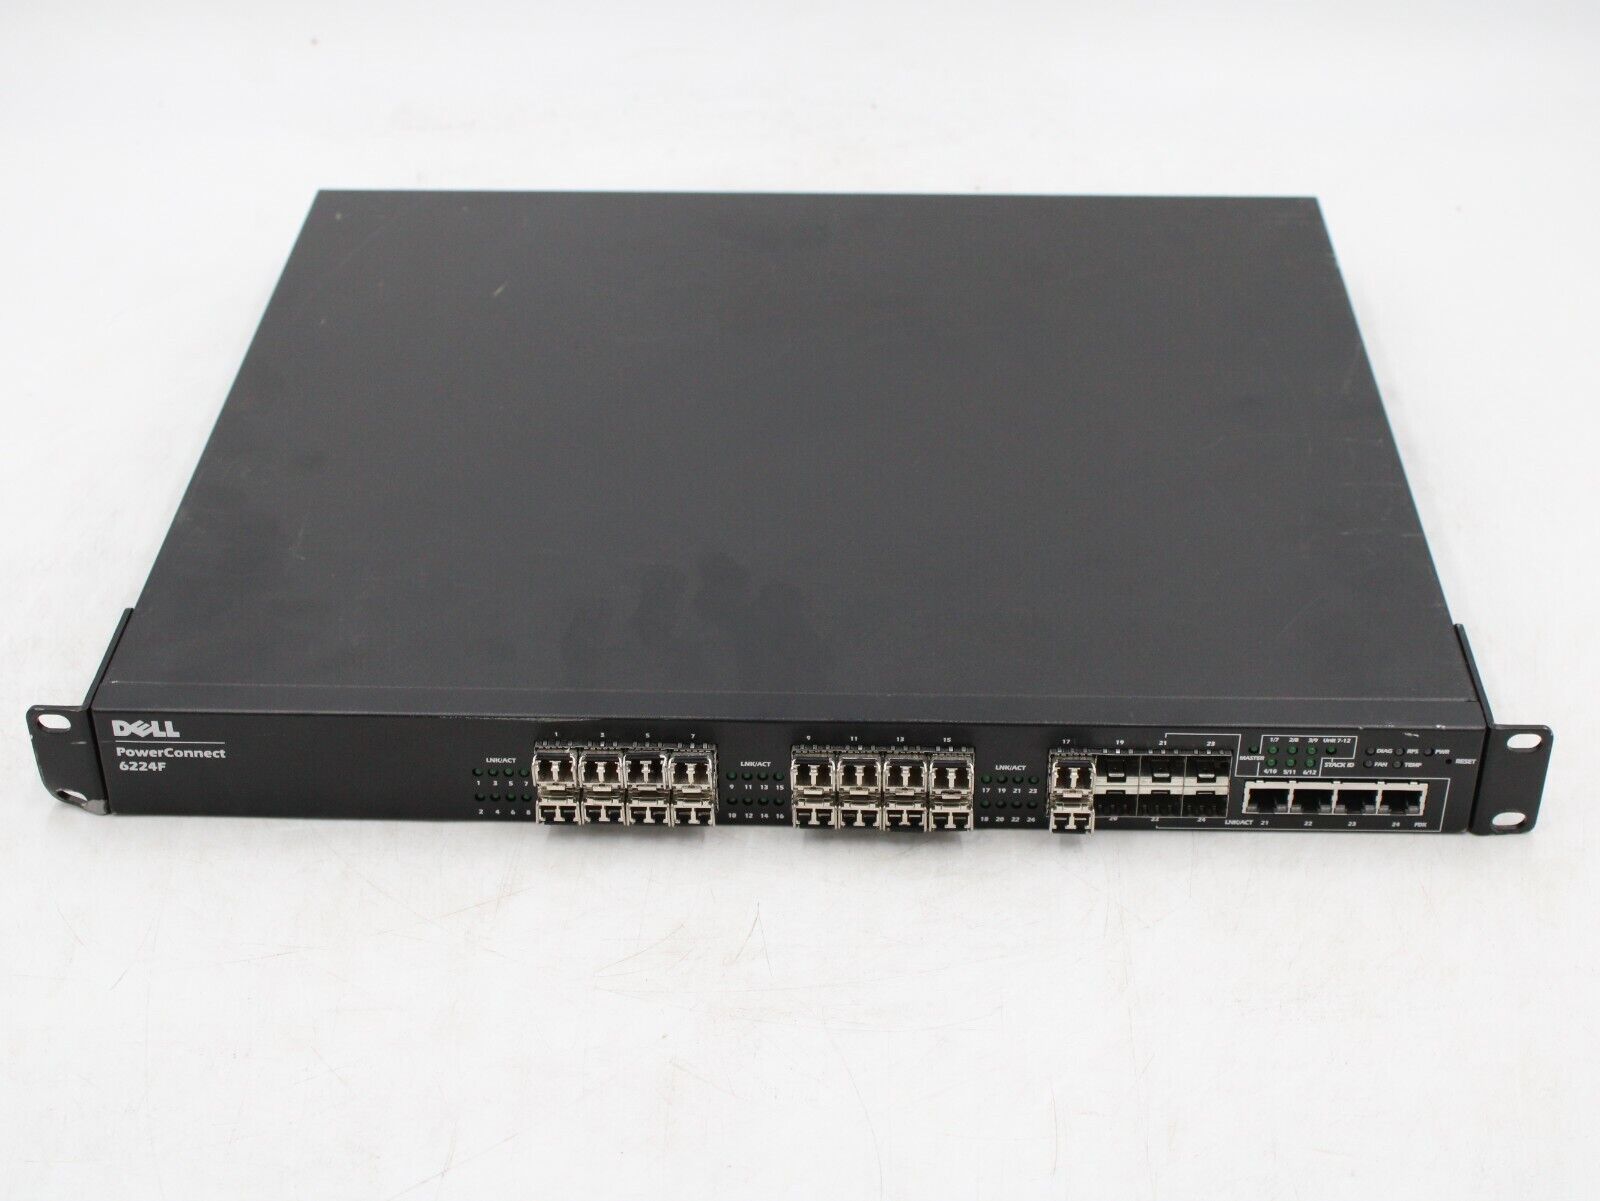 Dell PowerConnect 6224F 24-Port SFP Gigabit Network Switch TESTED 